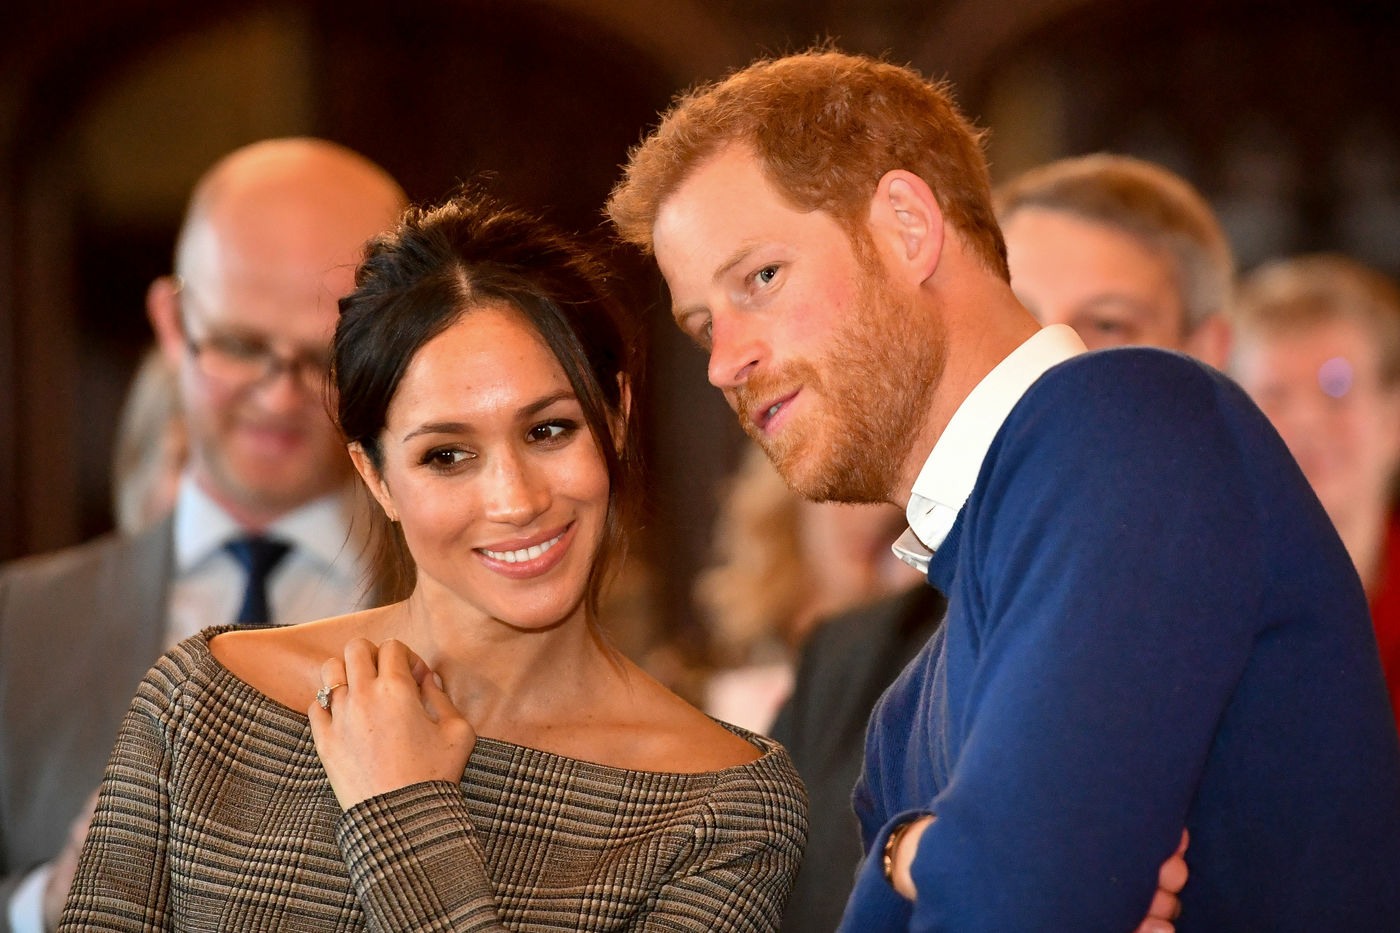 Prince Harry and fiancee Meghan Markle during a visit to Cardiff Castle as part of their royal duties